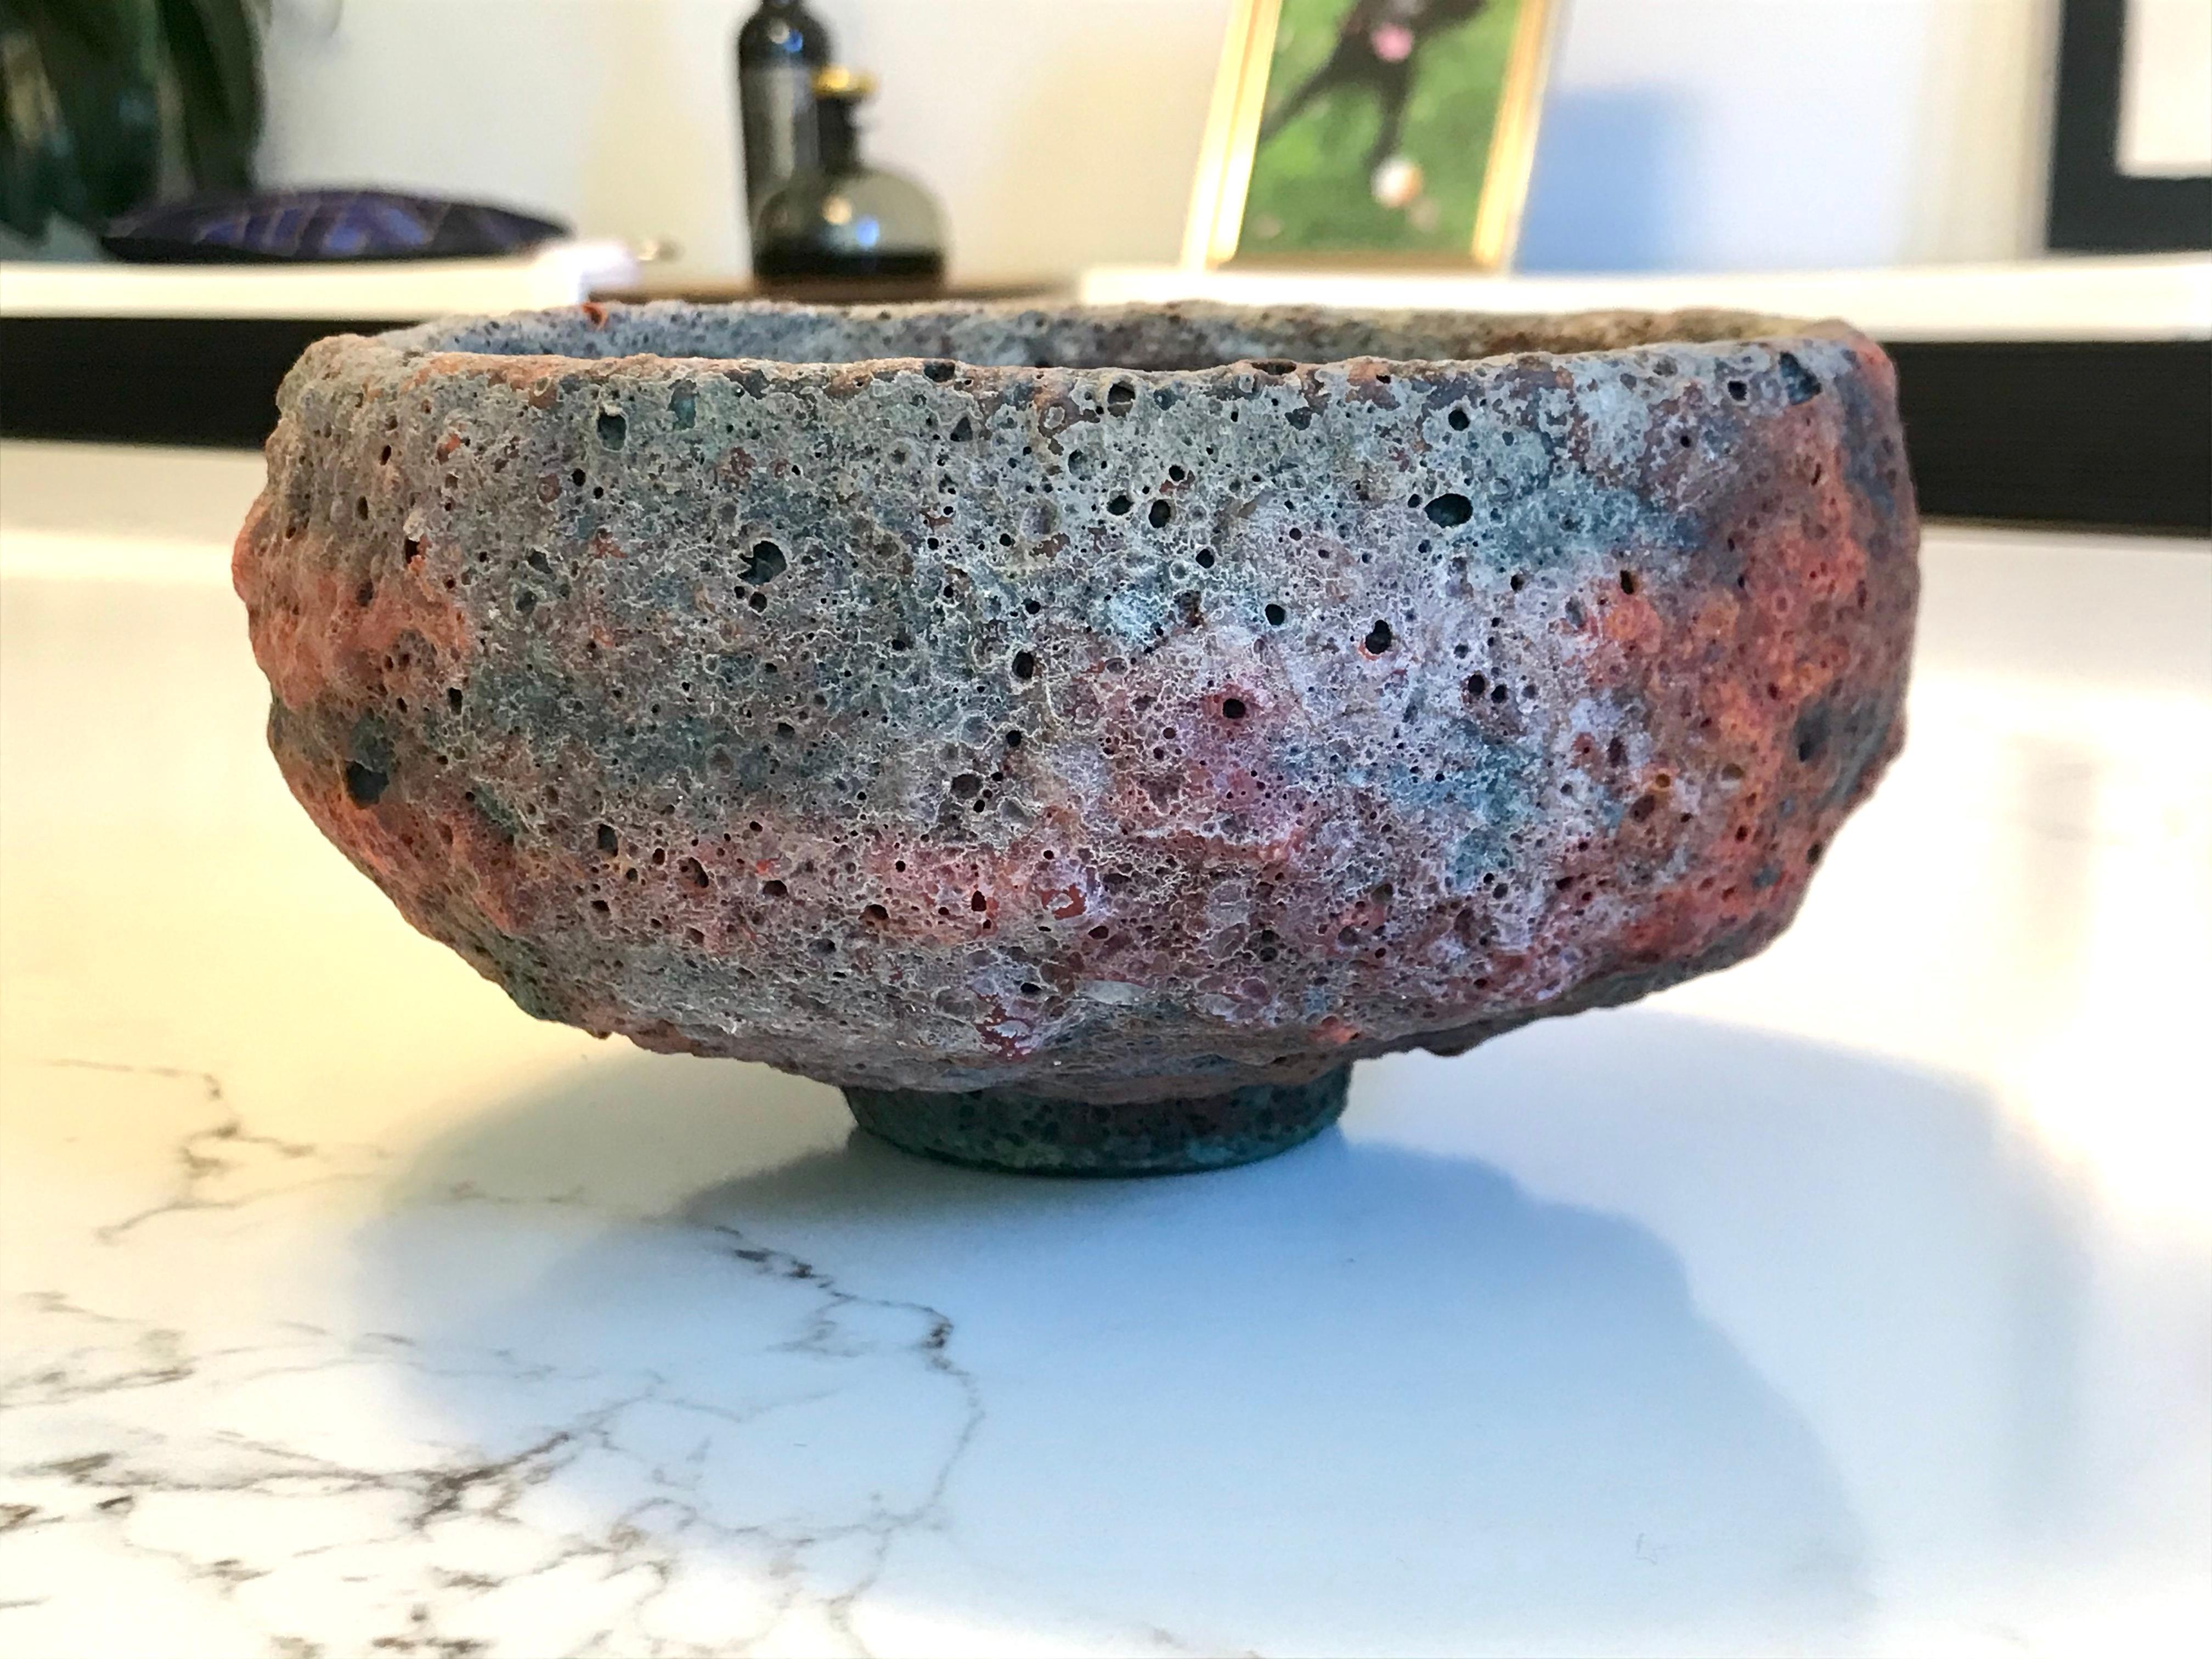 1948 - 1992
William + Polia Pillin were California potters 
He would throw the pots and she would paint them with decorative females, birds and horses
This is an unusual glaze executed by William
Wheel thrown clay with an amazing crater glaze